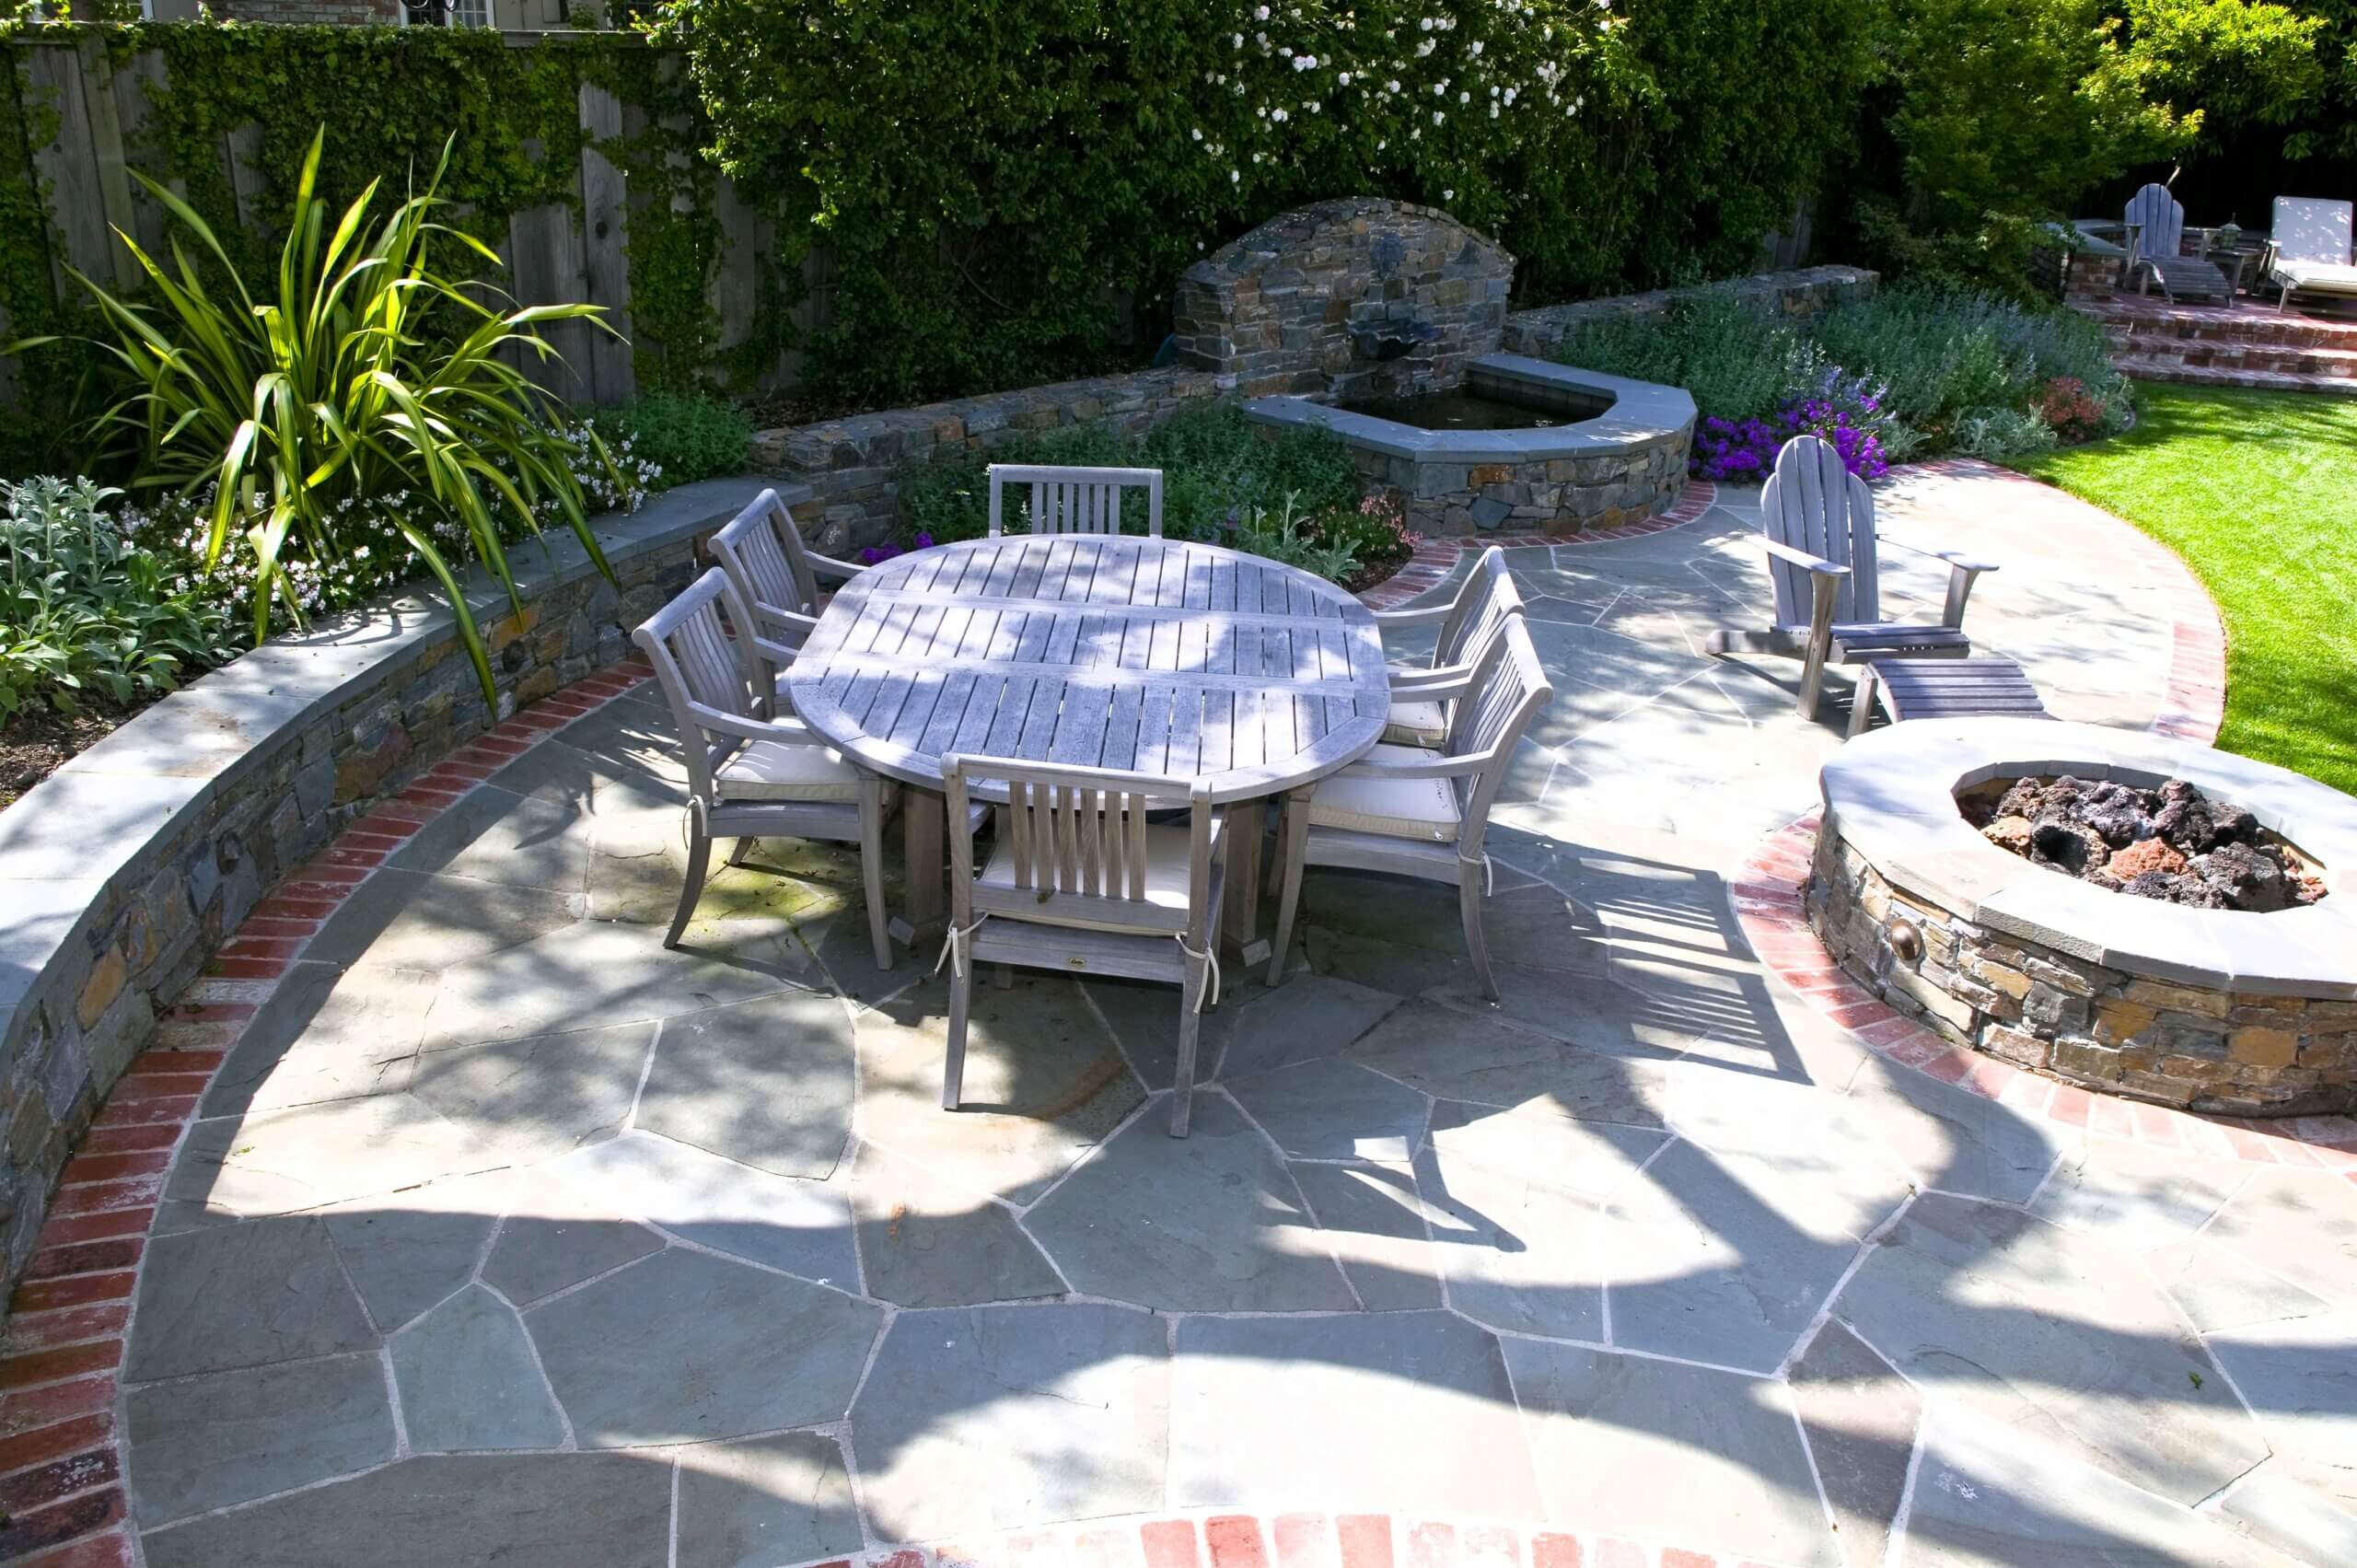 Brick and stone curved dining patio in California landscaped backyard